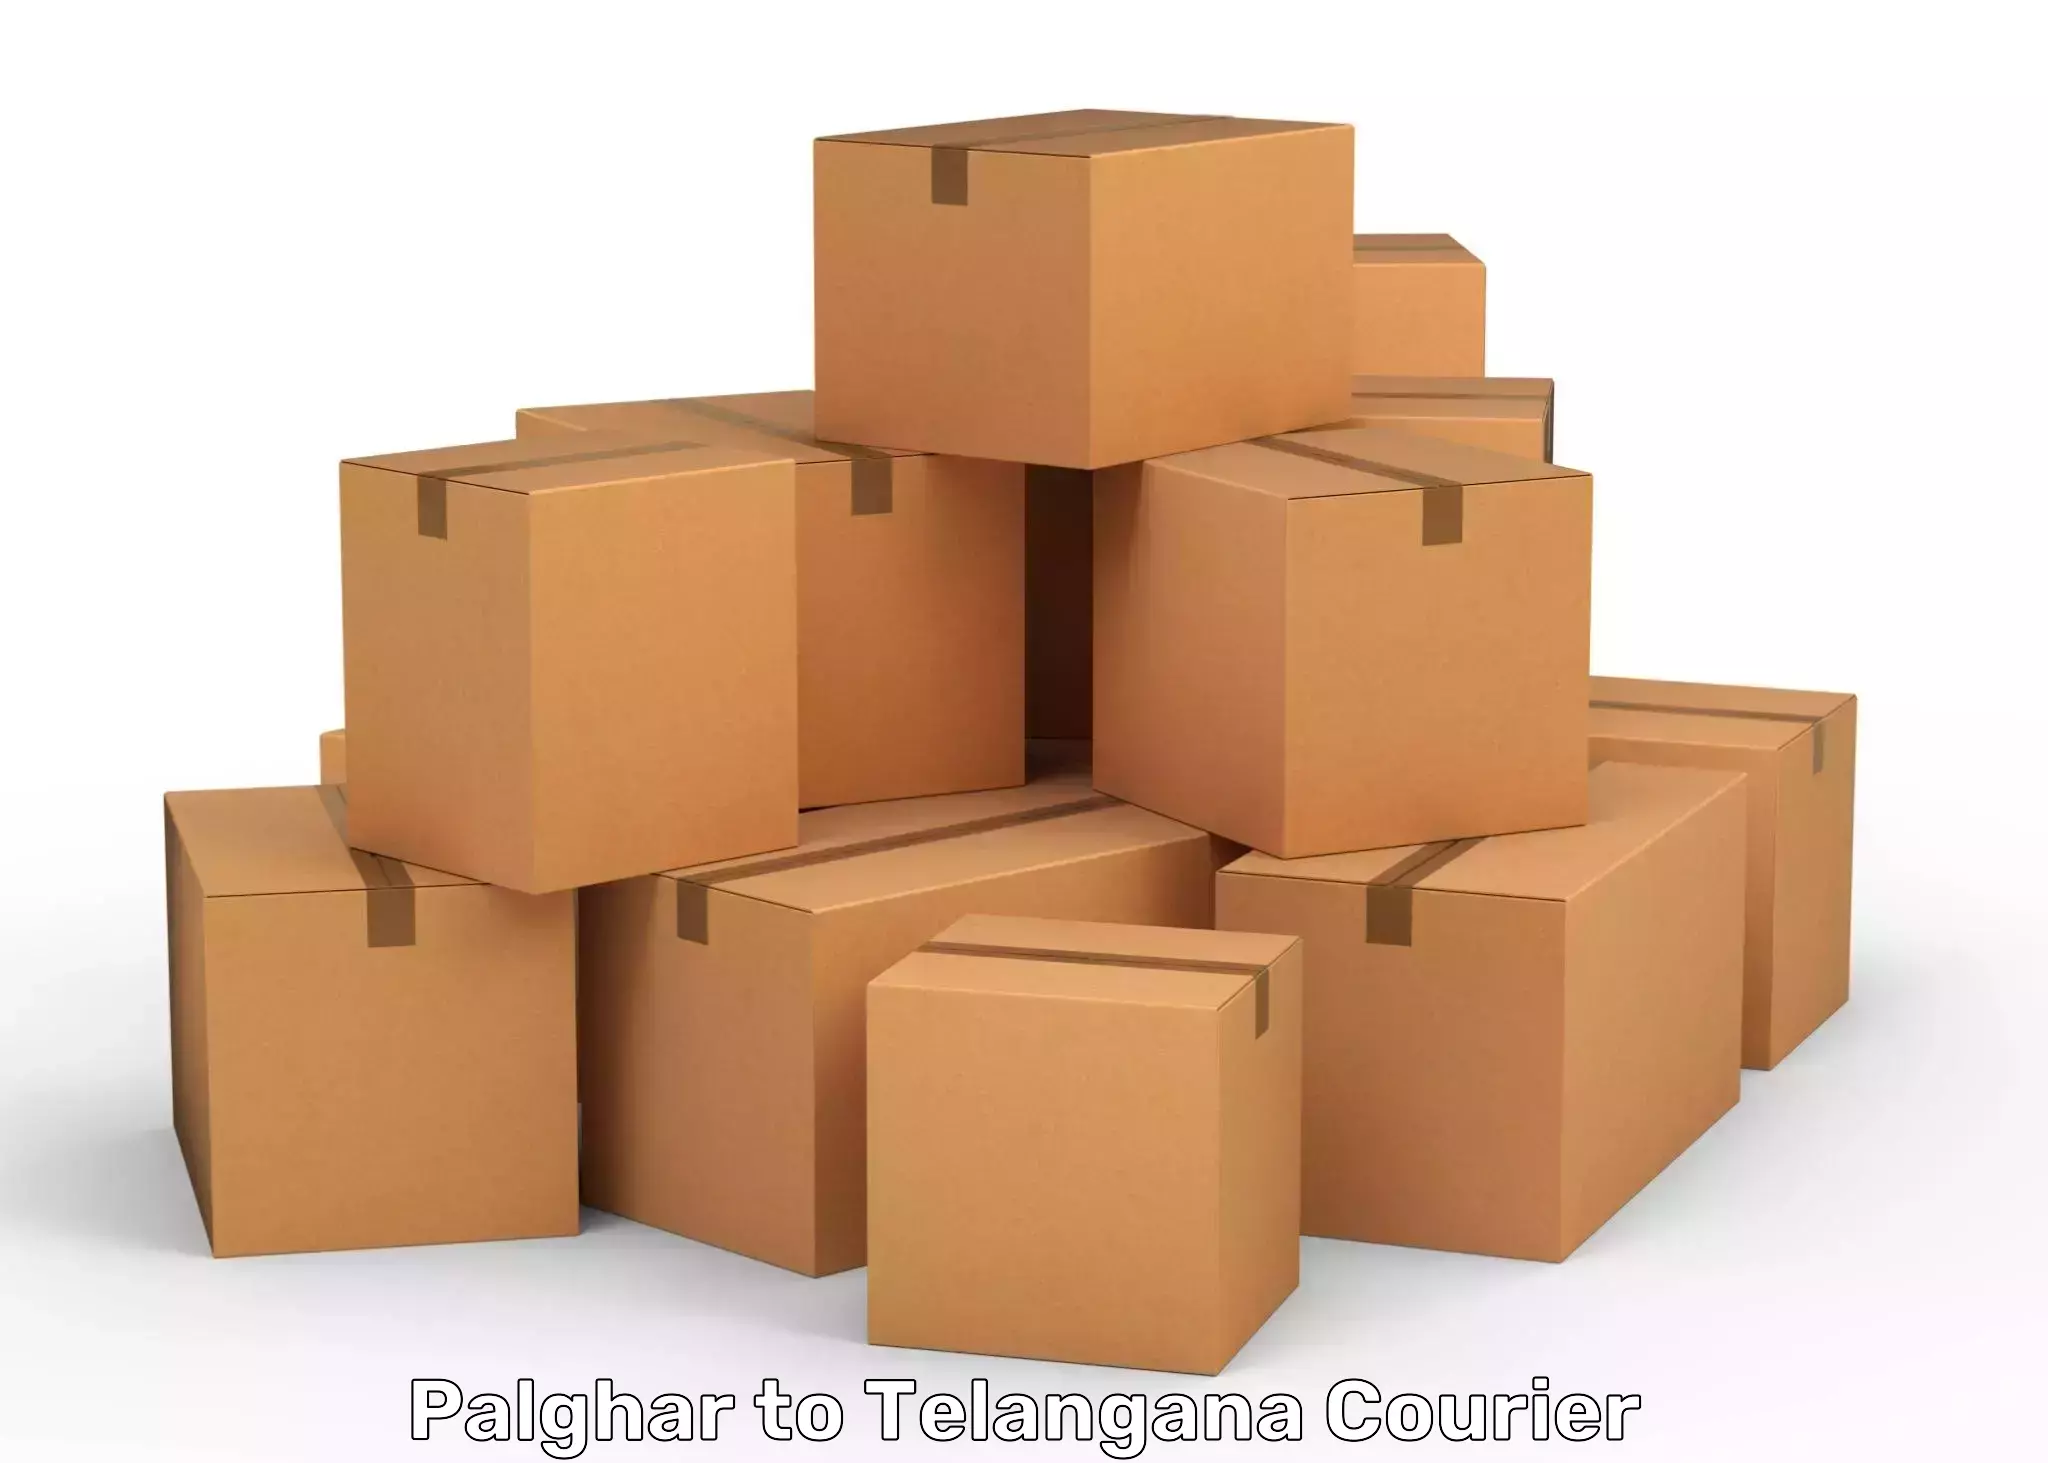 International courier networks Palghar to Secunderabad